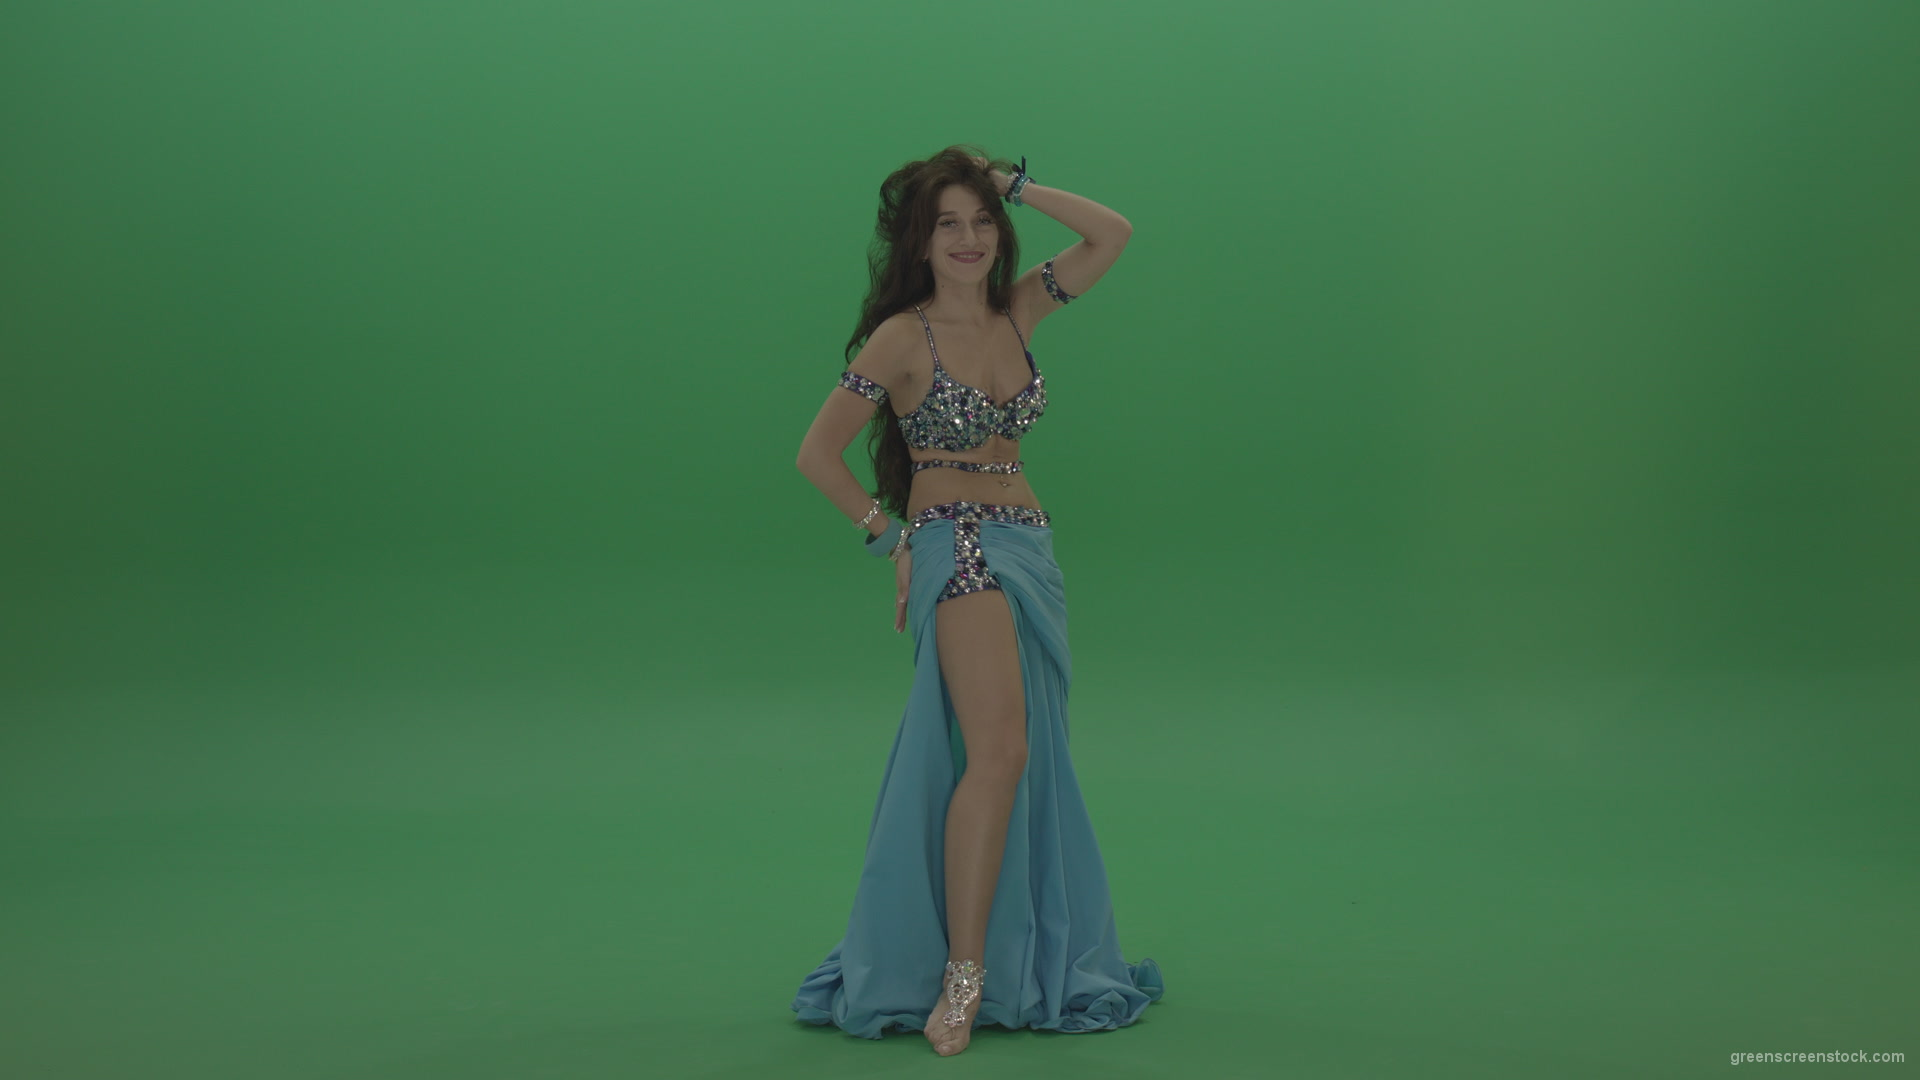 Awesome-belly-dancer-in-blue-wear-display-amazing-dance-moves-over-chromakey-background_008 Green Screen Stock